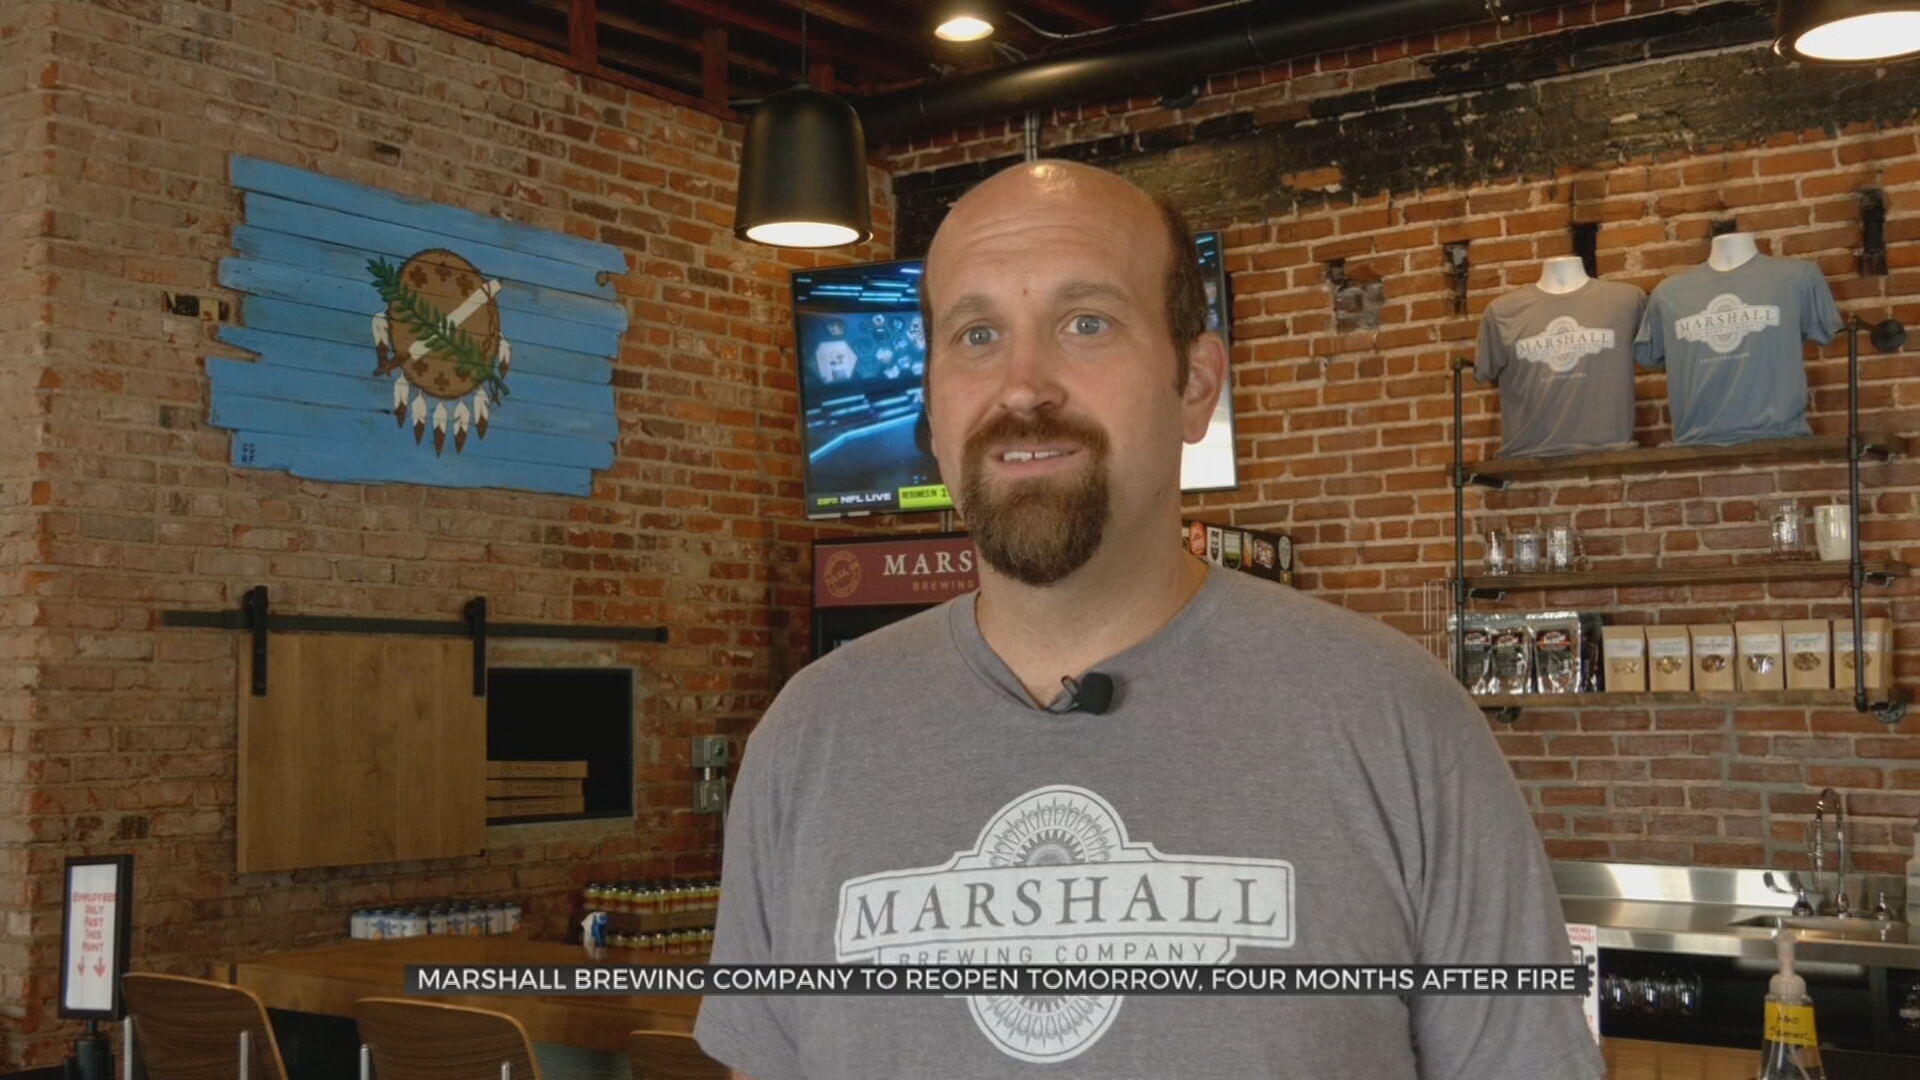 Marshall Brewing Company Taproom To Reopen 4 Months After Fire Damage